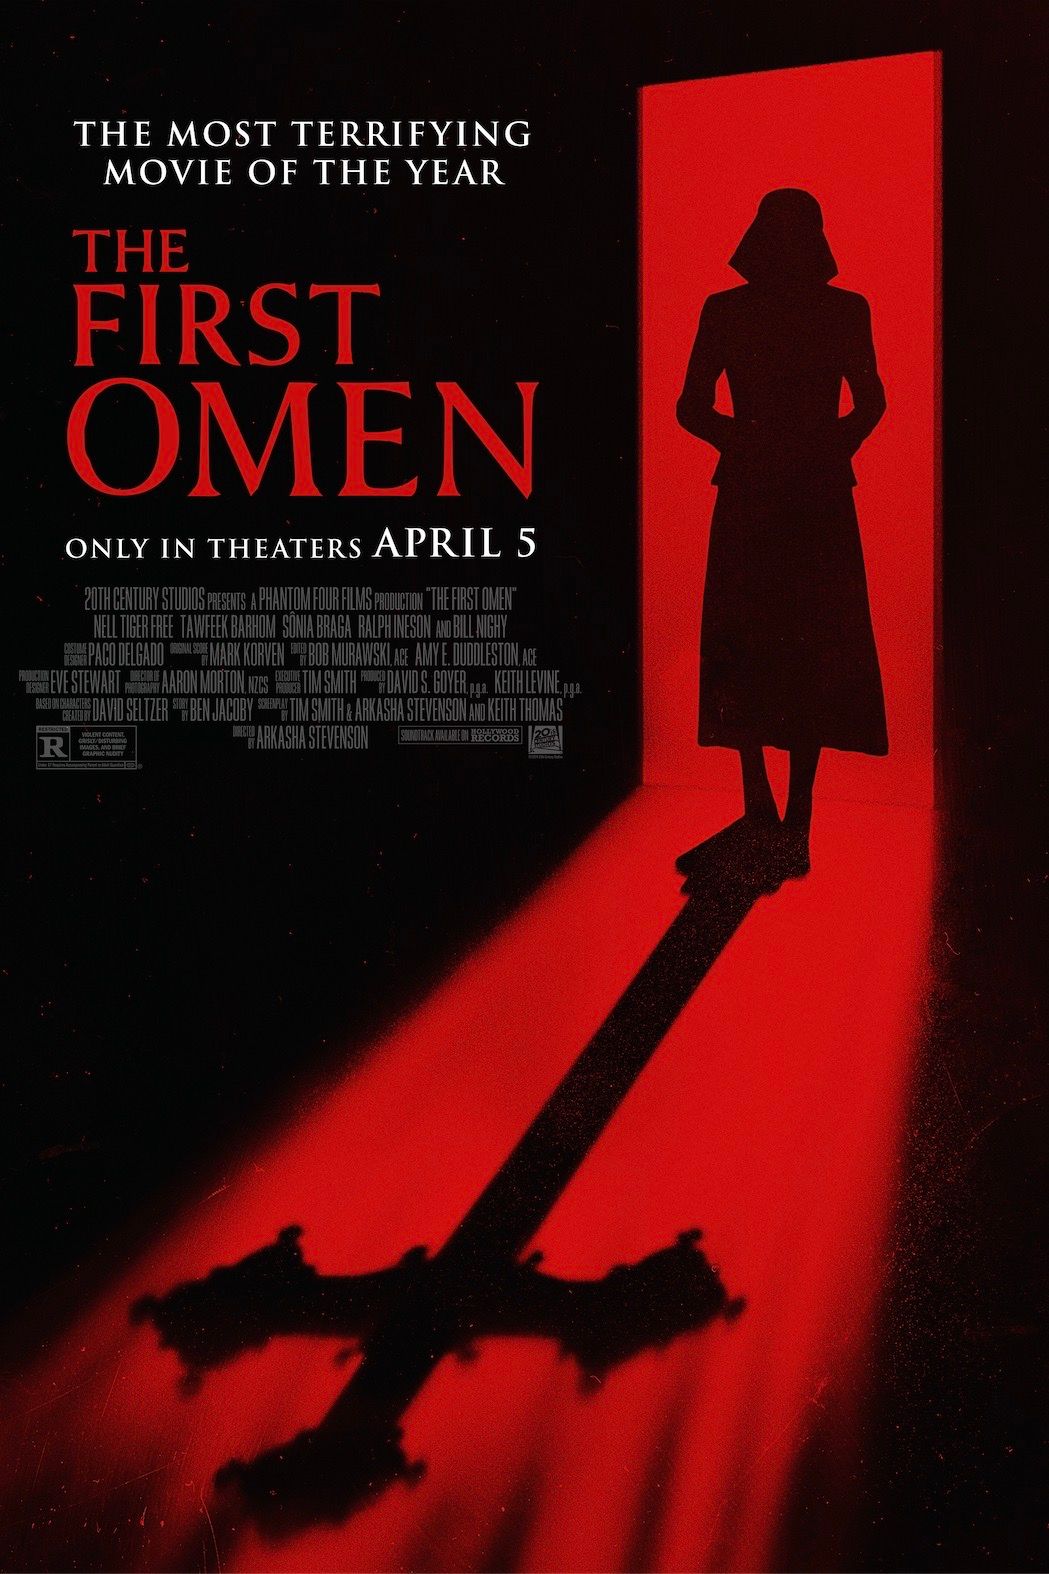 The First Omen Movie Poster Showing a Nun in a Red Doorway and a Shadow of a Cross-1